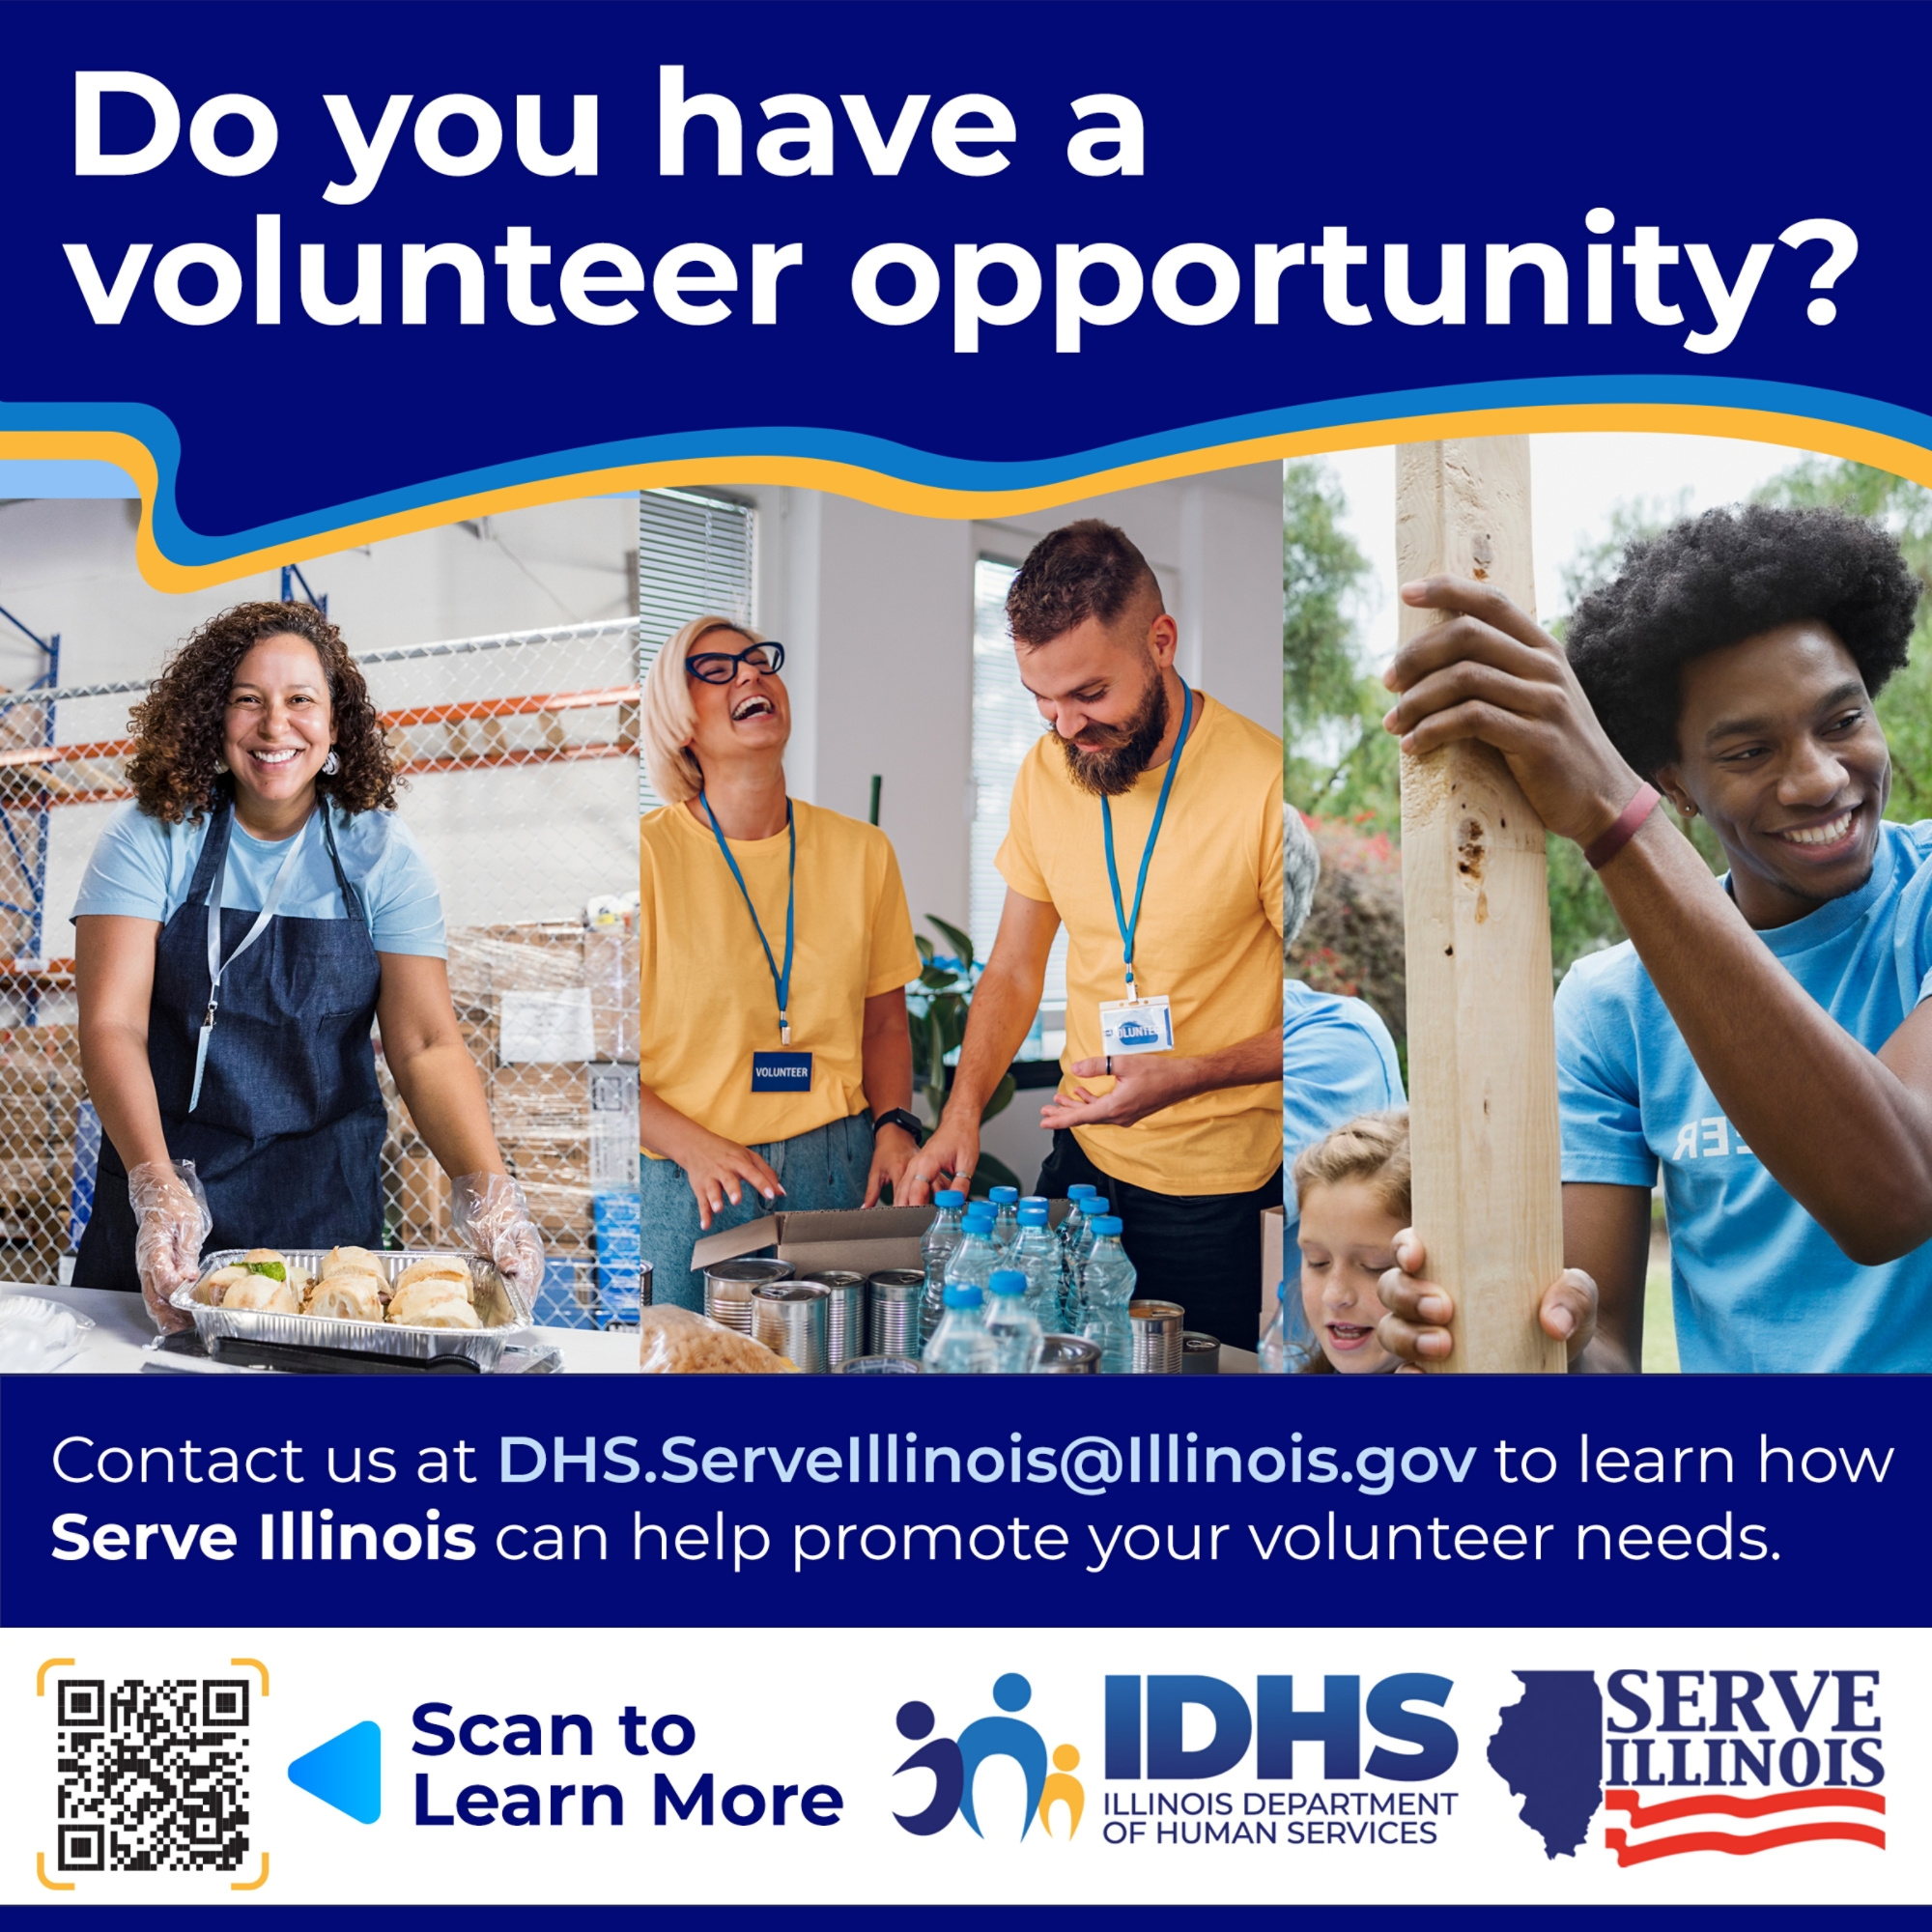 "Do you have a volunteer opportunity? Contact us at DHS. ServeIllinois@illinois.gov to learn how Serve Illinois can help promote your volunteer needs"